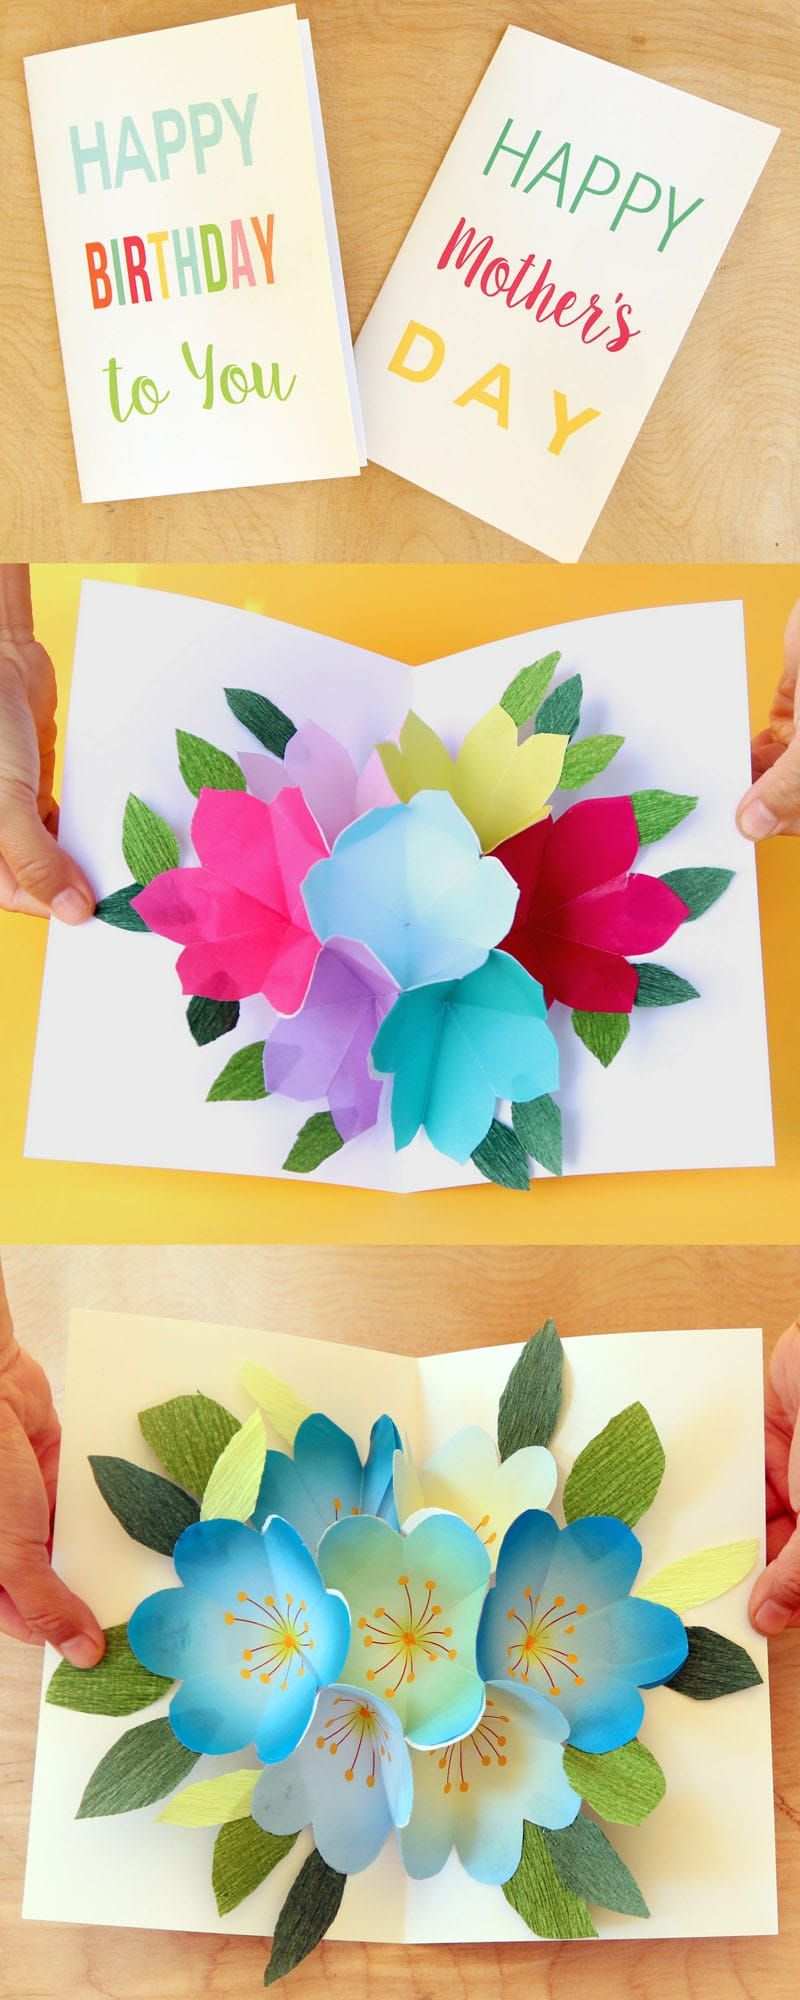 70 Standard Pop Up Card Tutorial With Steps for Ms Word by Pop Up Card Tutorial With Steps